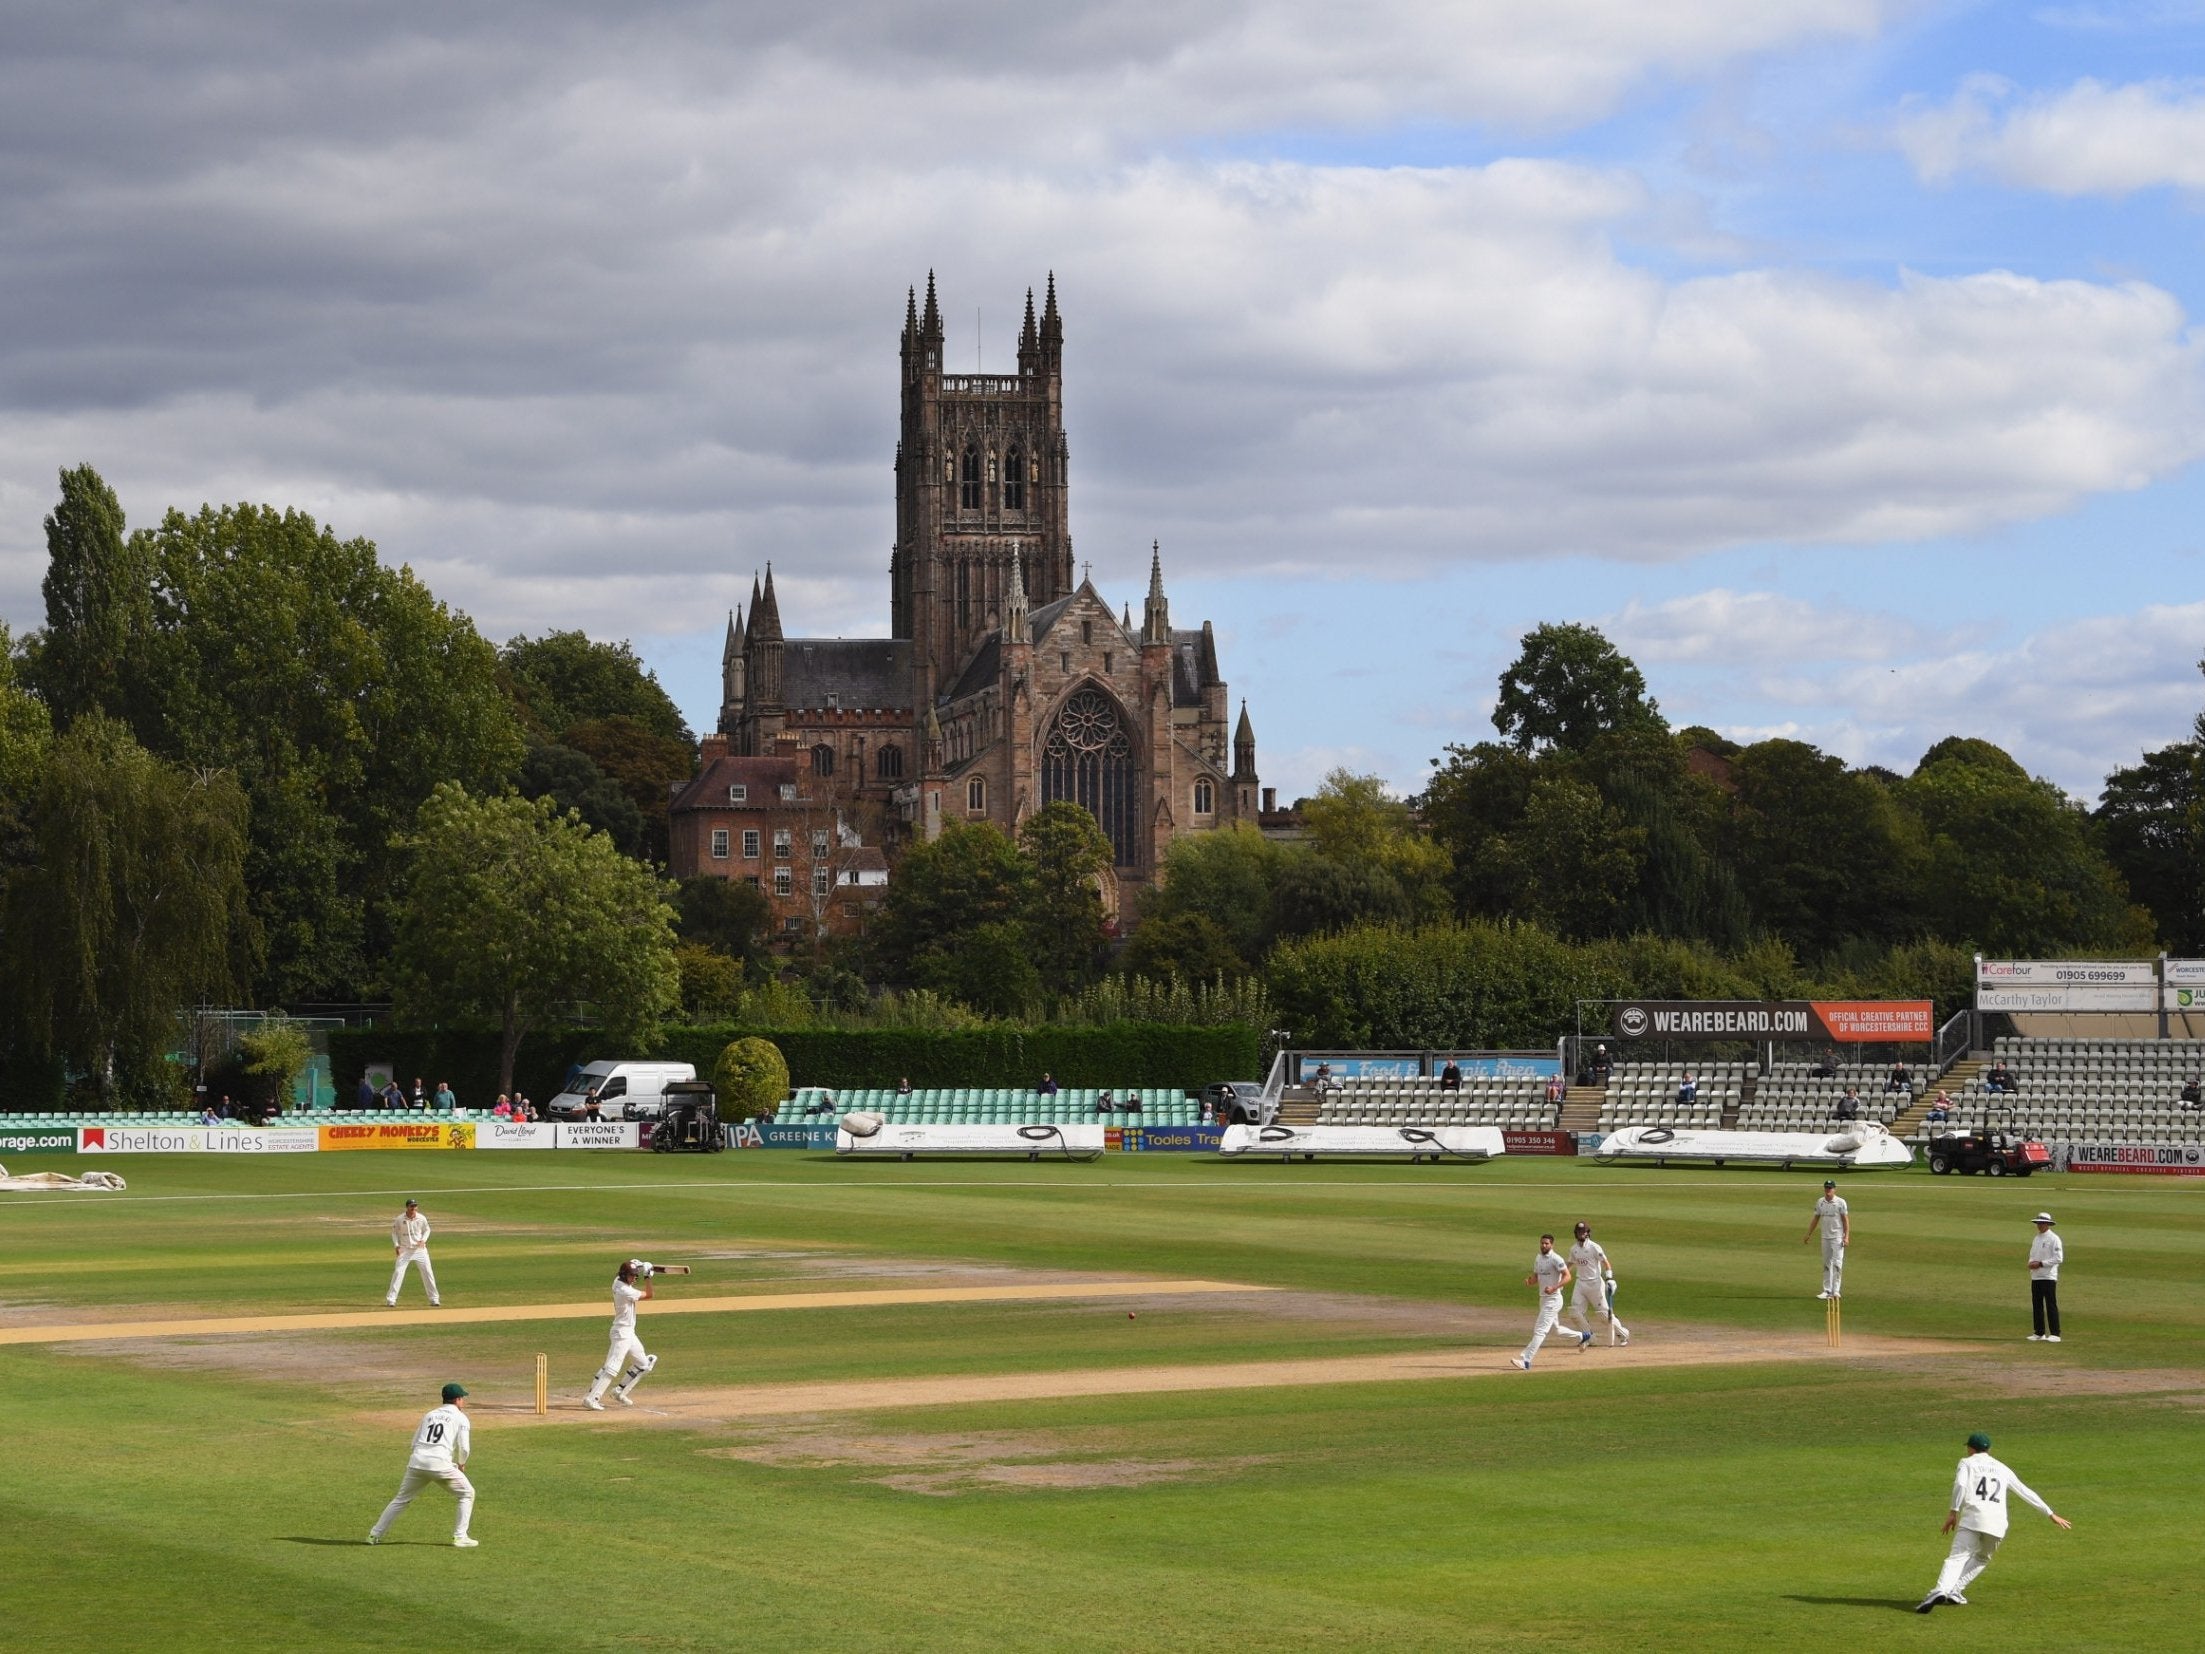 Surrey claimed a tense three-wicket victory in Worcester